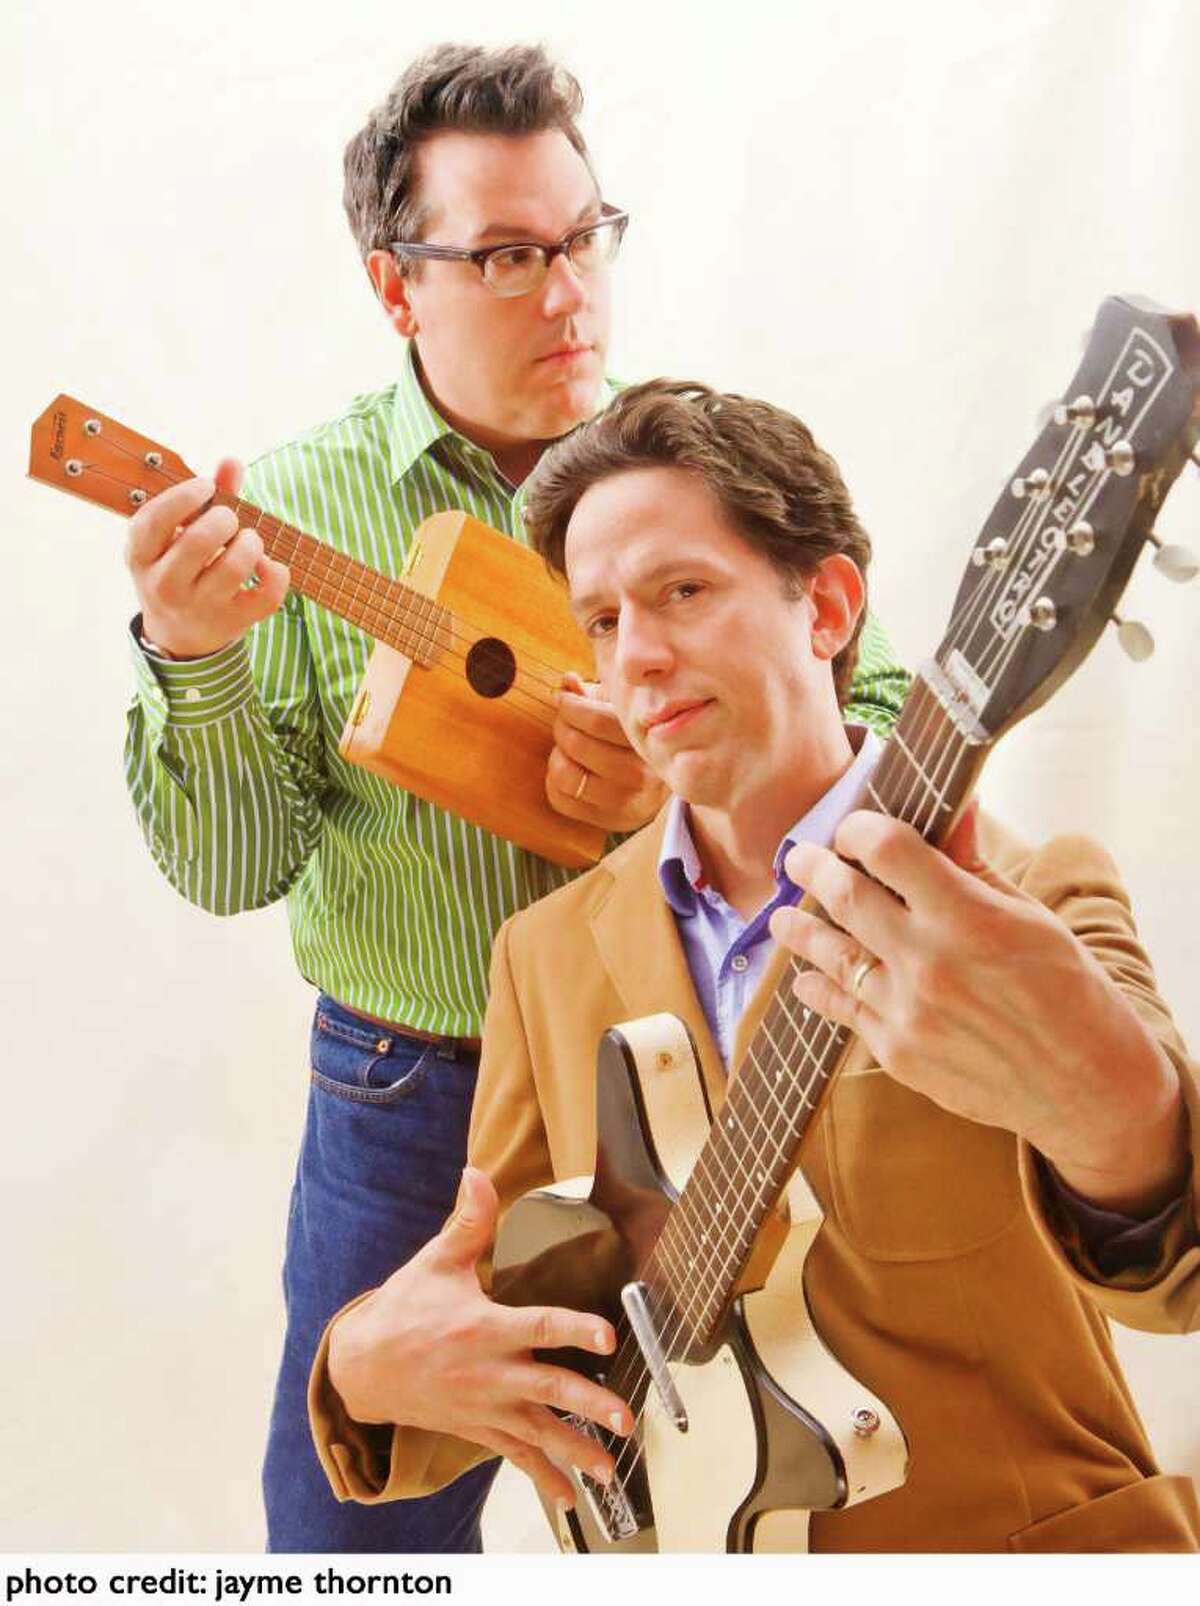 They Might Be Giants will be at the Quick Center at Fairfield University for two shows Saturday, Oct. 30, including a 4 p.m. family show.